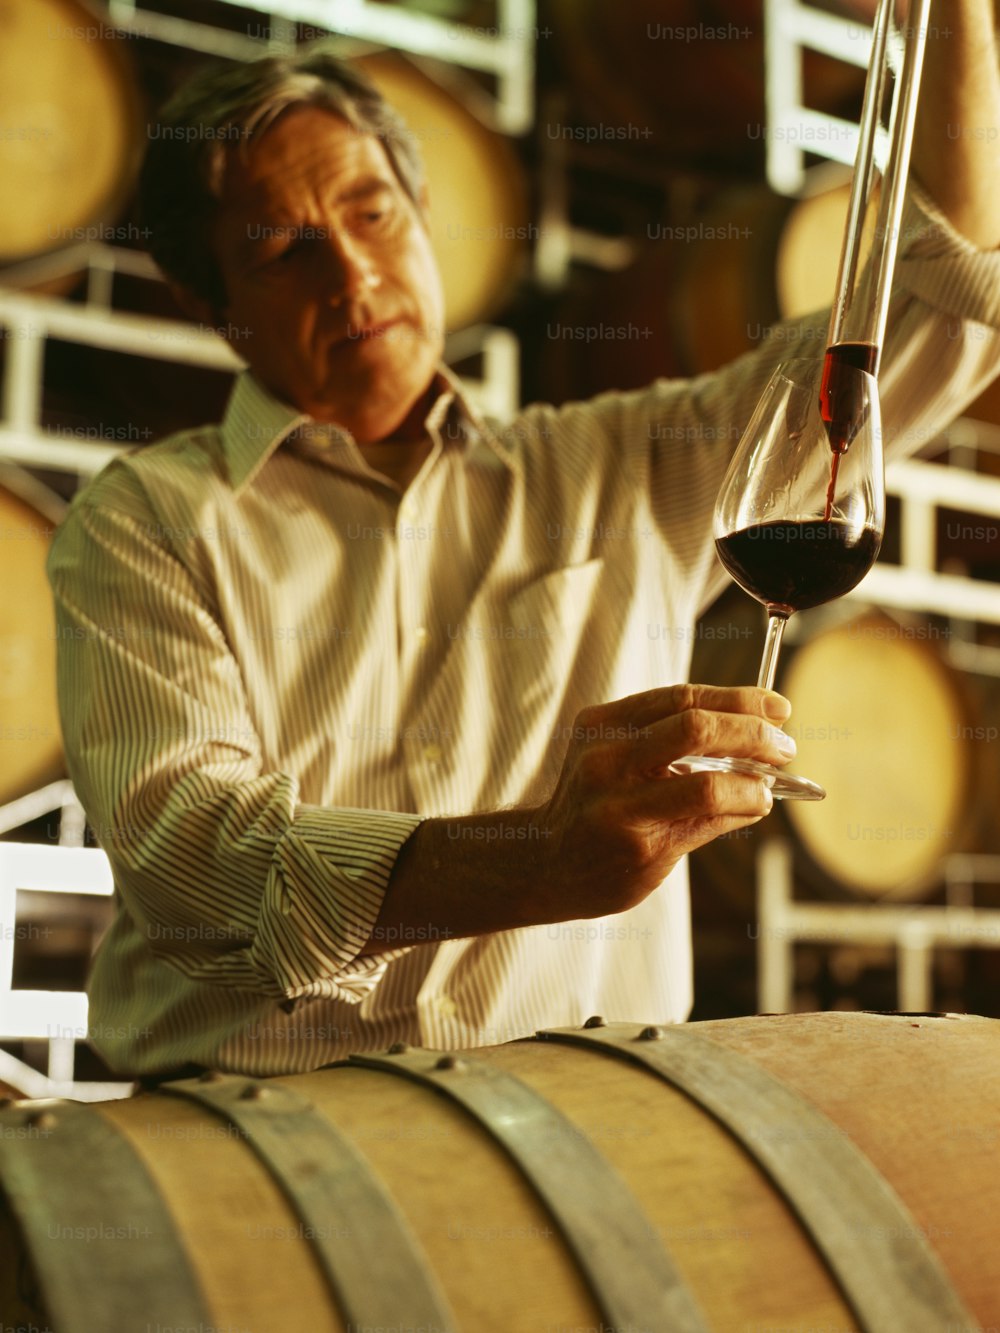 a man holding a glass of wine in front of barrels